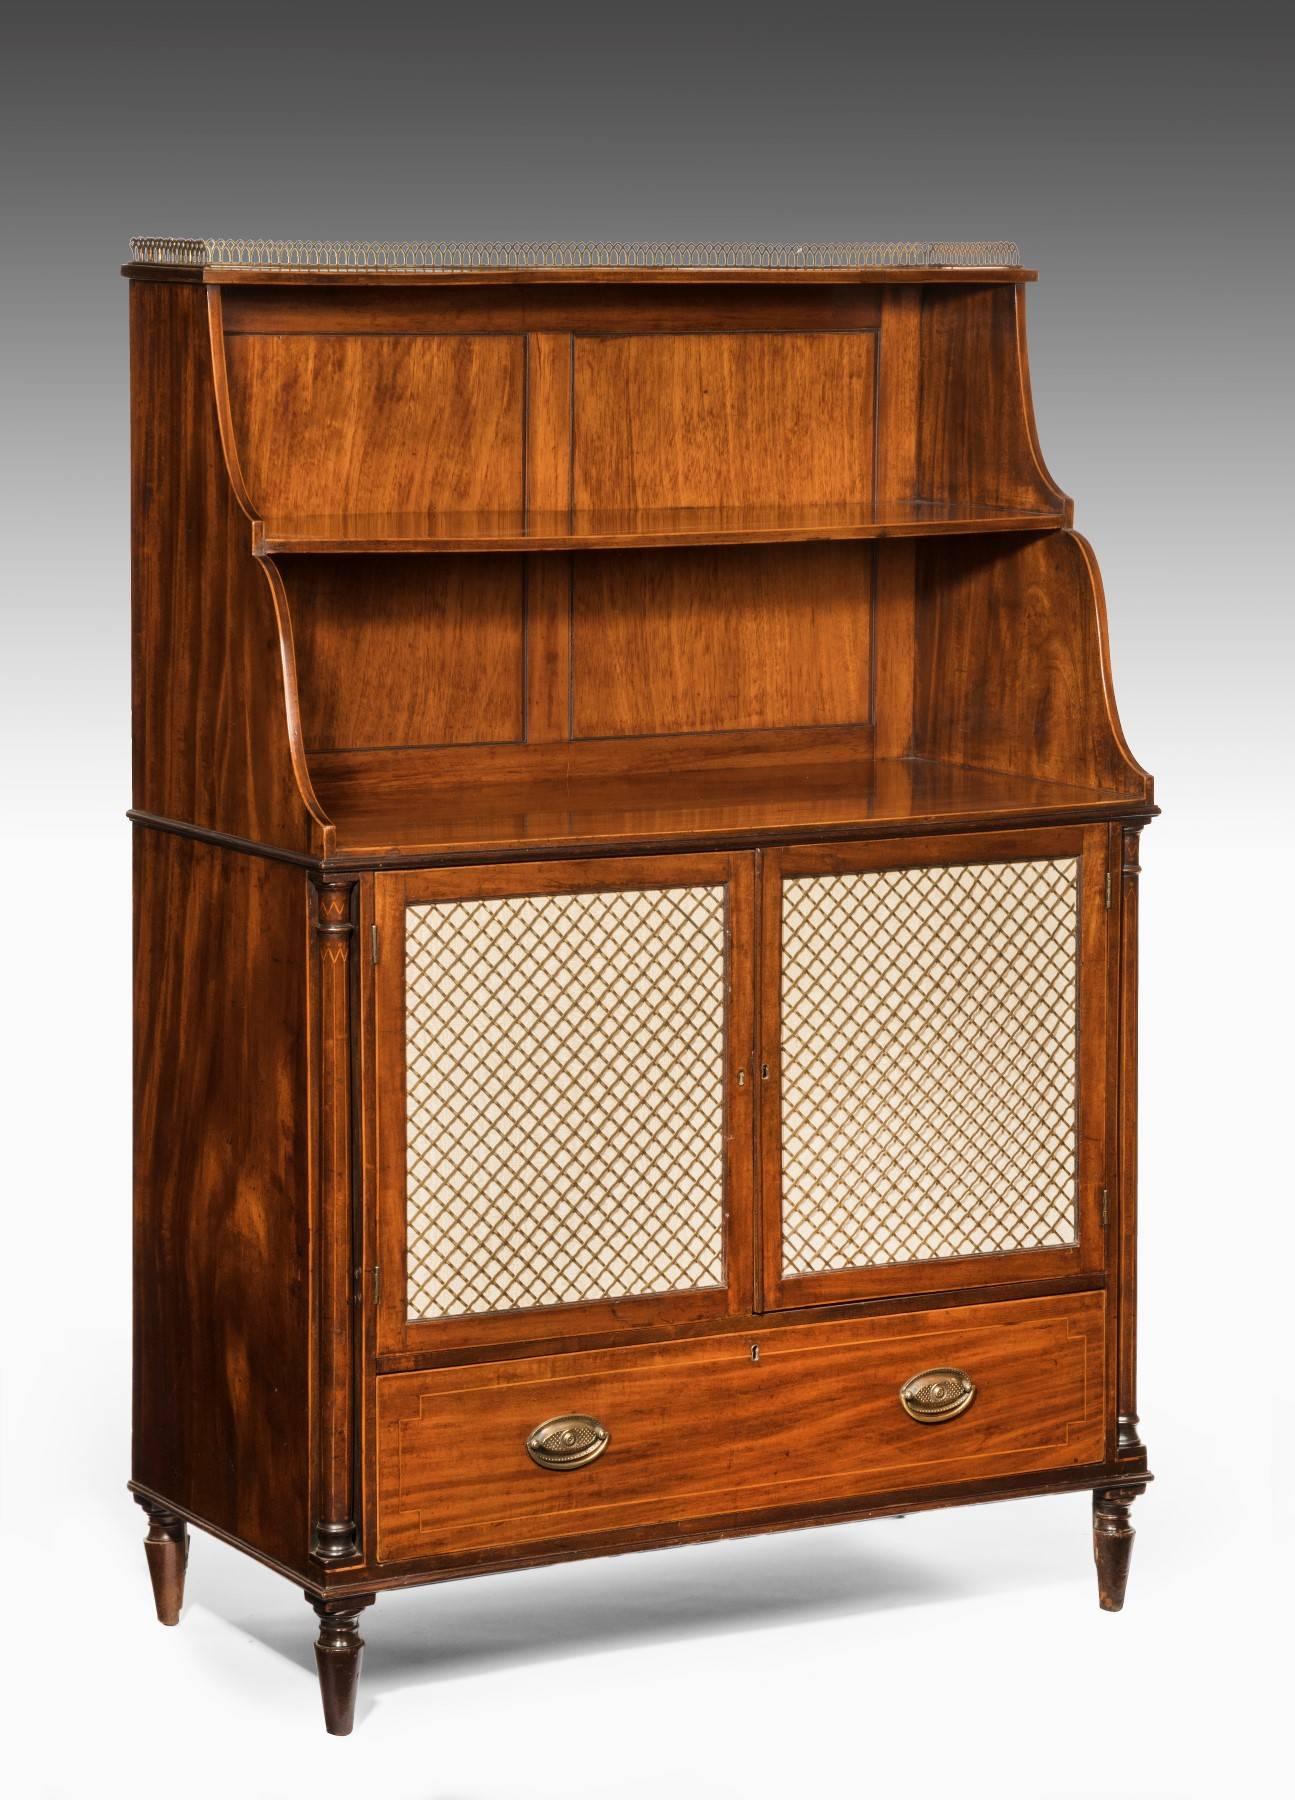 Made from Cuban mahogany, the bookcase is of excellent color. It has a brass gallery above graduating shelves and the base has a cupboard with twin doors that have inset grills. It also has a long base drawer and the excellent quality of the